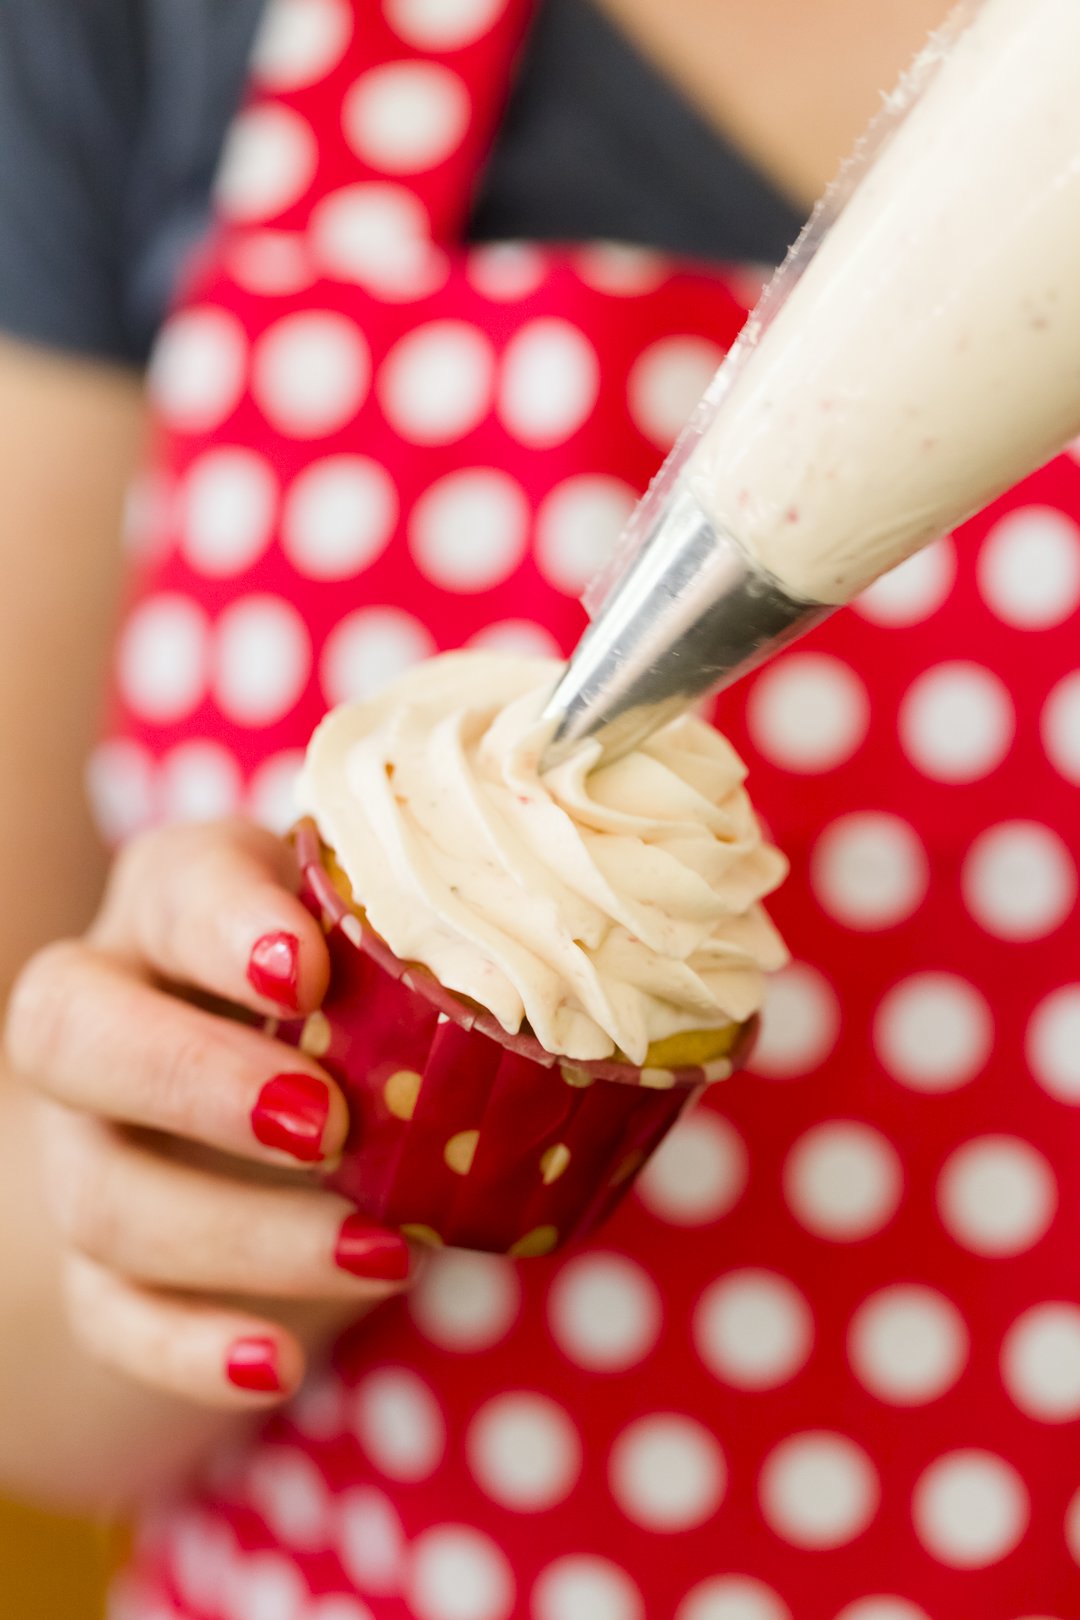 Strawberry Whipped Cream Frosting being piped onto a cupcake